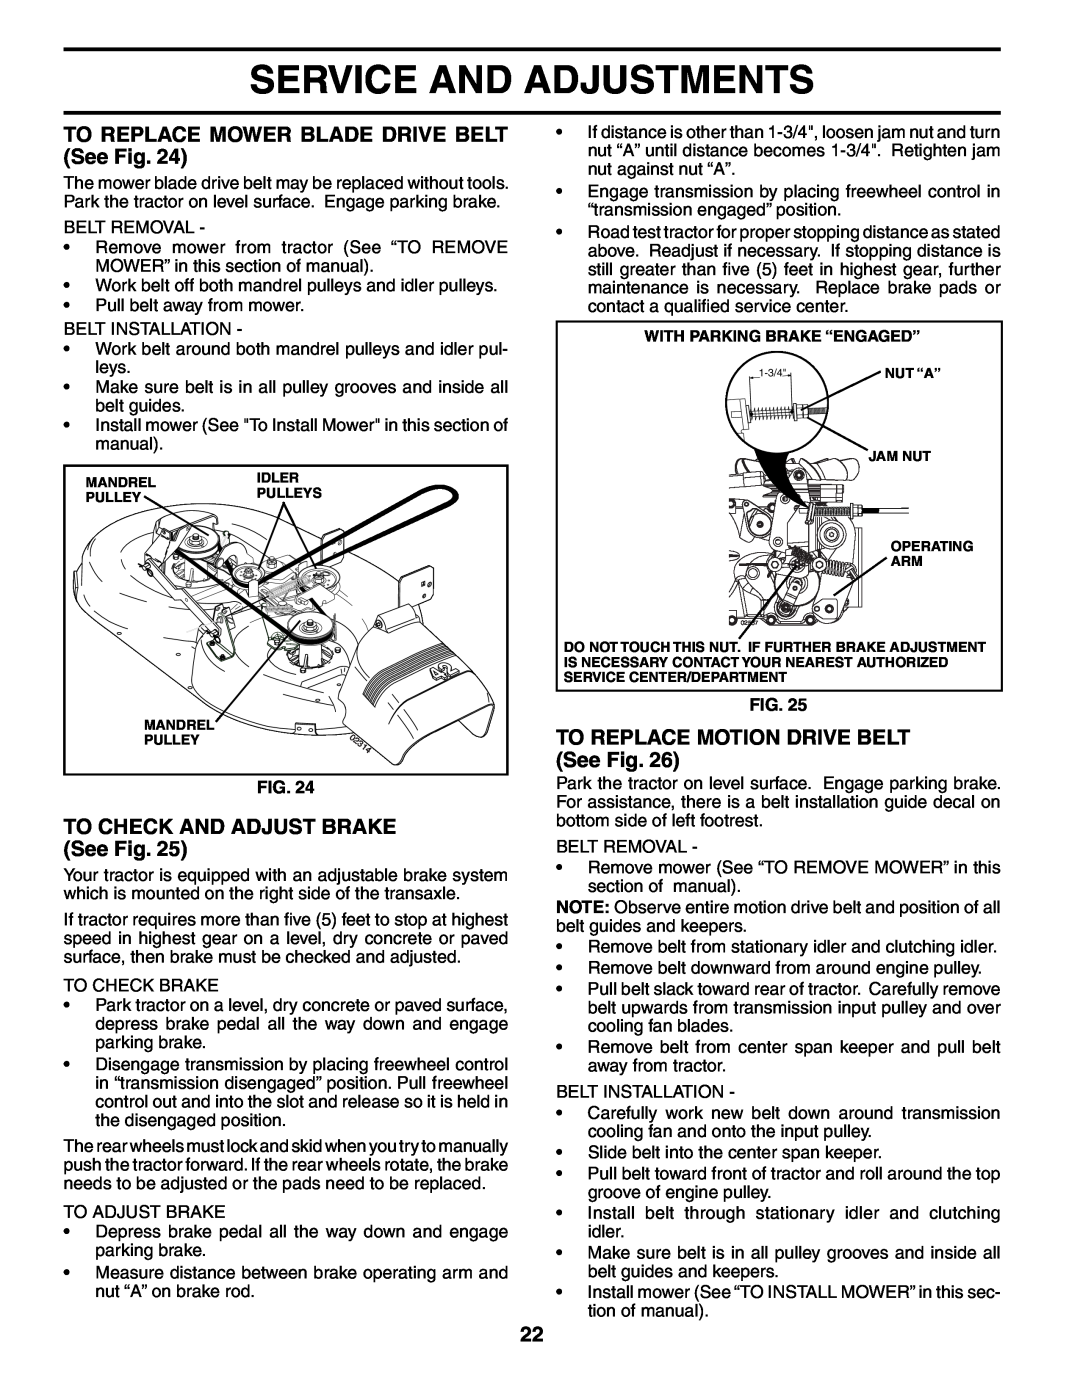 Poulan 954570925 TO REPLACE MOWER BLADE DRIVE BELT See Fig, TO CHECK AND ADJUST BRAKE See Fig, Service And Adjustments 